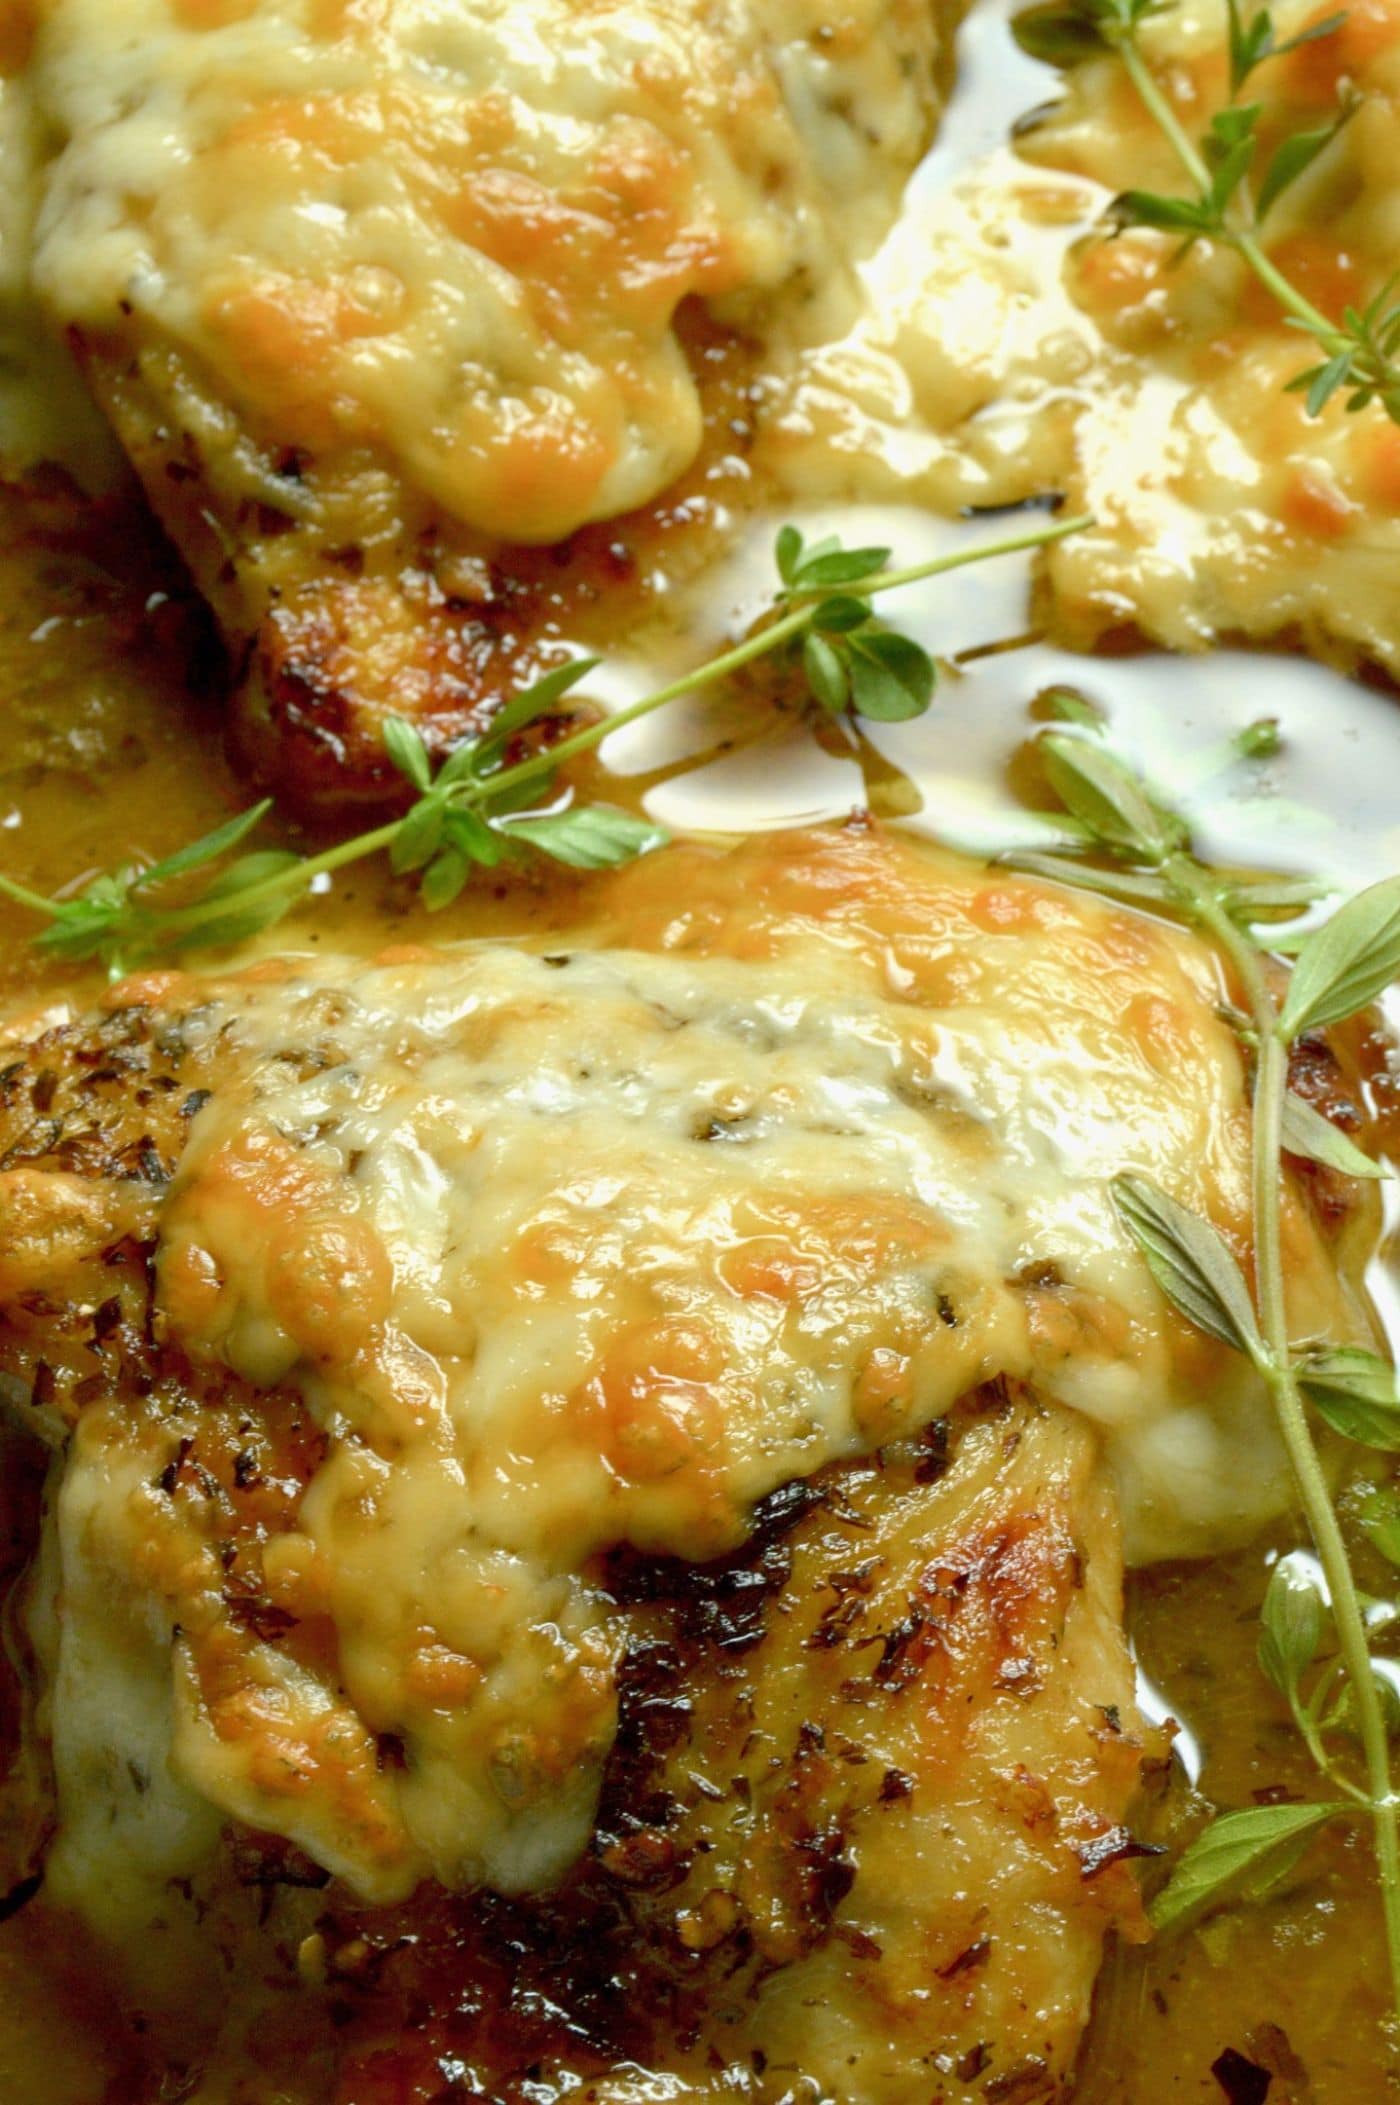 French Onion Chicken: caramelized onions under melted gooey cheese all atop braised tender chicken with a French onion style sauce.  An excellent option for dinner with friends, but your family will want it for a weeknight dinner option!